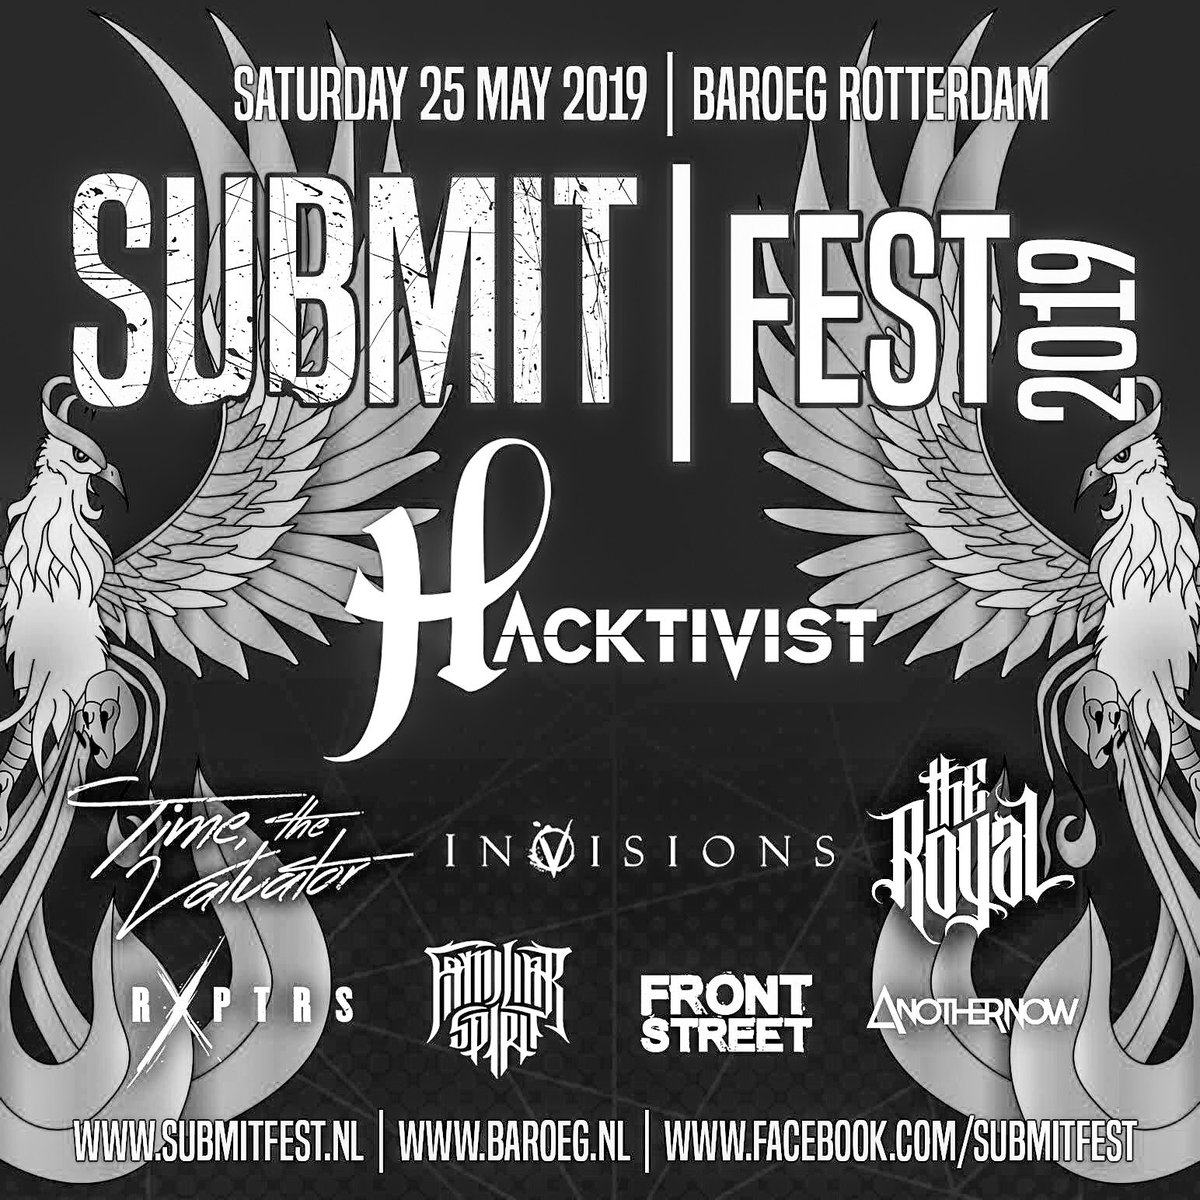 Europe. We’re coming for you. @SubmitFest is 2 weeks away!